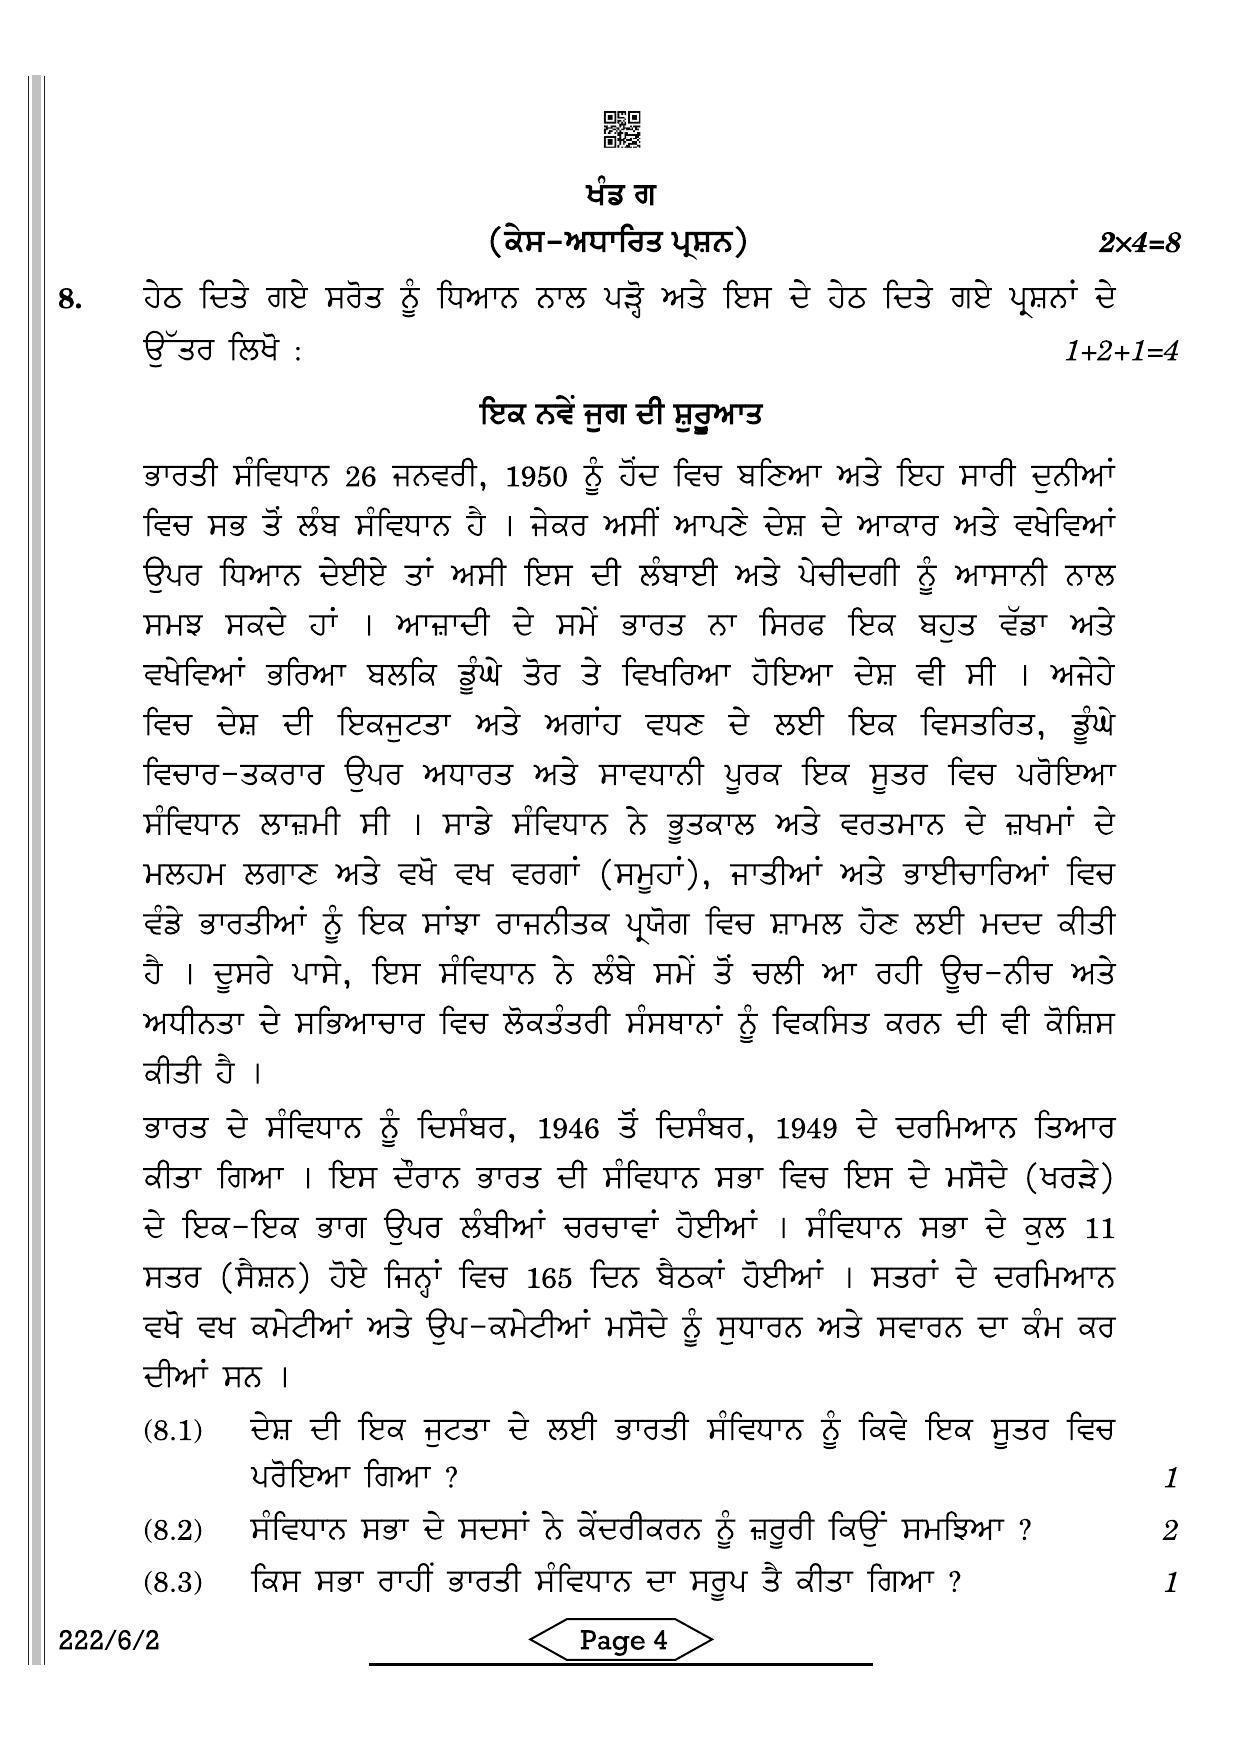 CBSE Class 12 222-6-2 History Punjabi 2022 Compartment Question Paper - Page 4